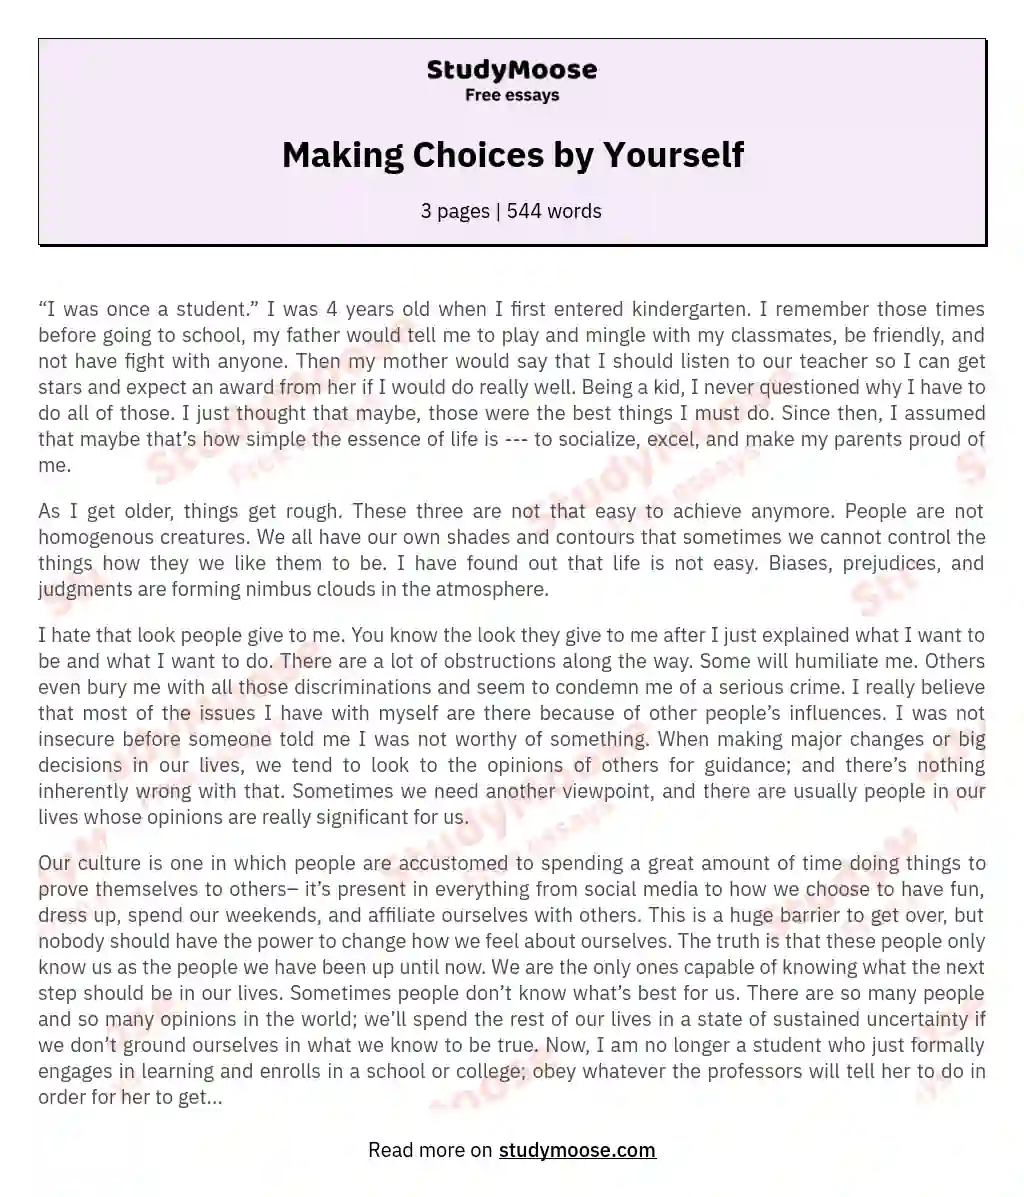 Making Choices by Yourself essay